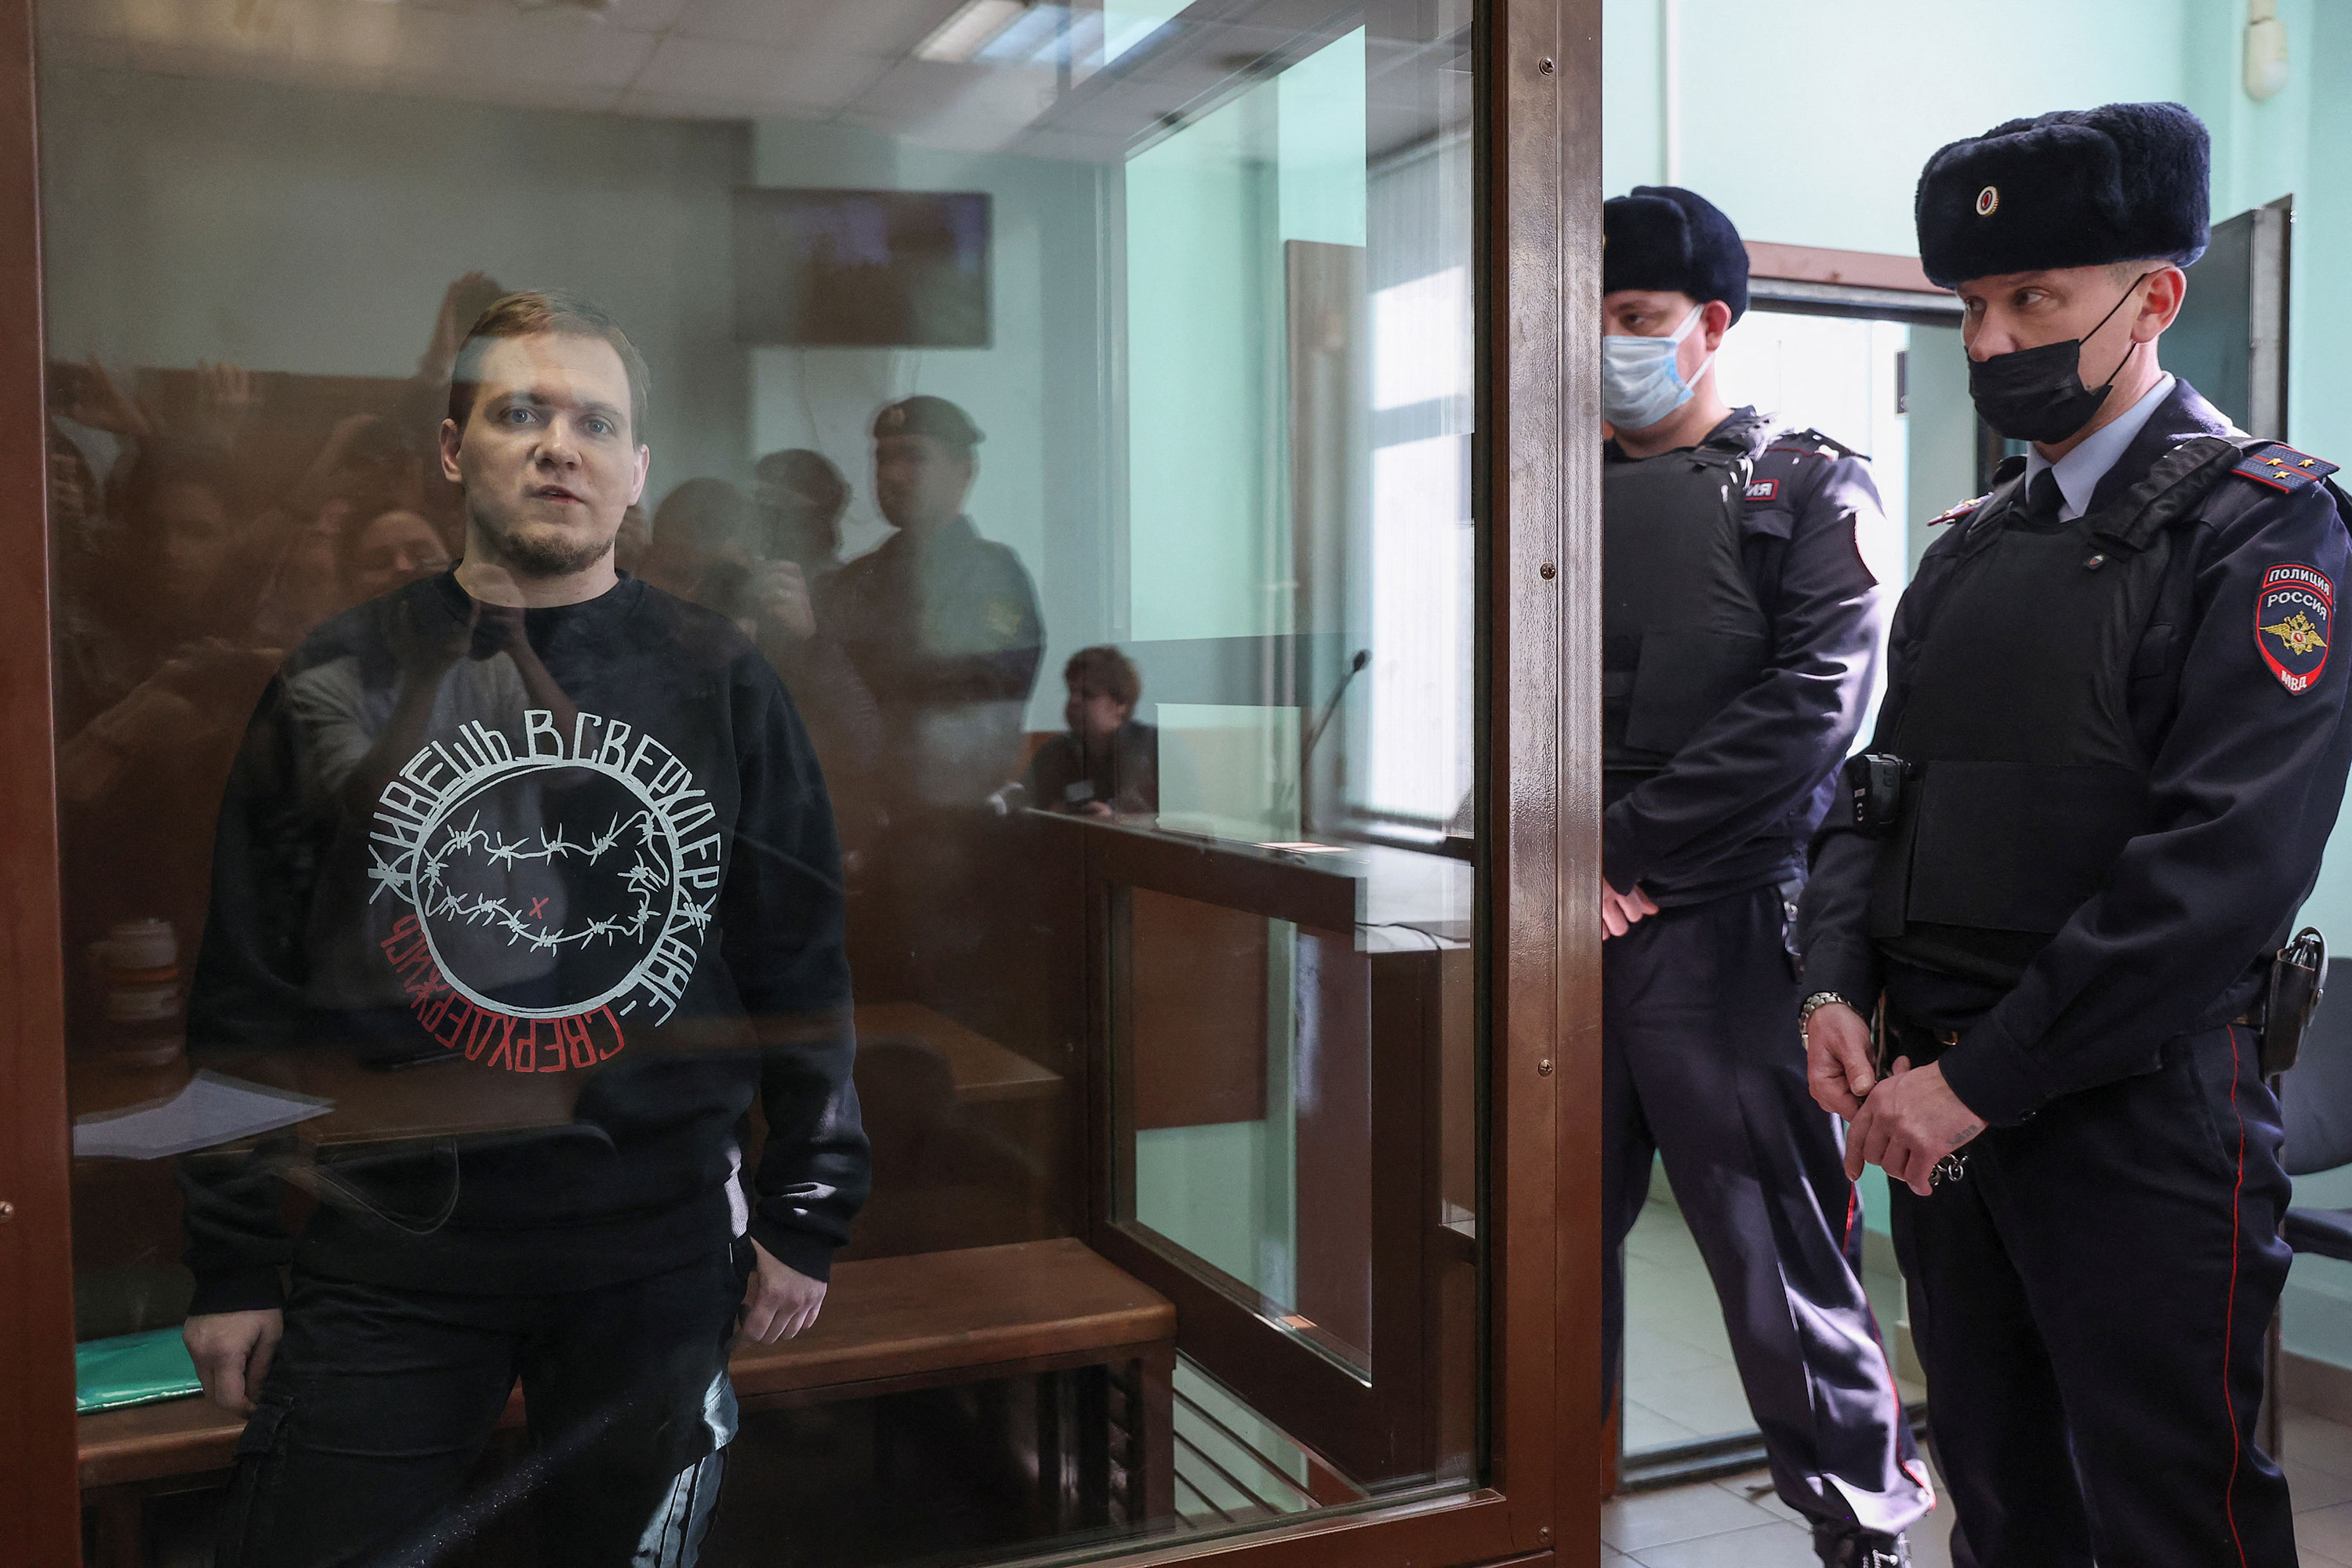 Dmitry Ivanov speaks from inside an enclosure for defendants as he attends a court hearing in Moscow on Tuesday.